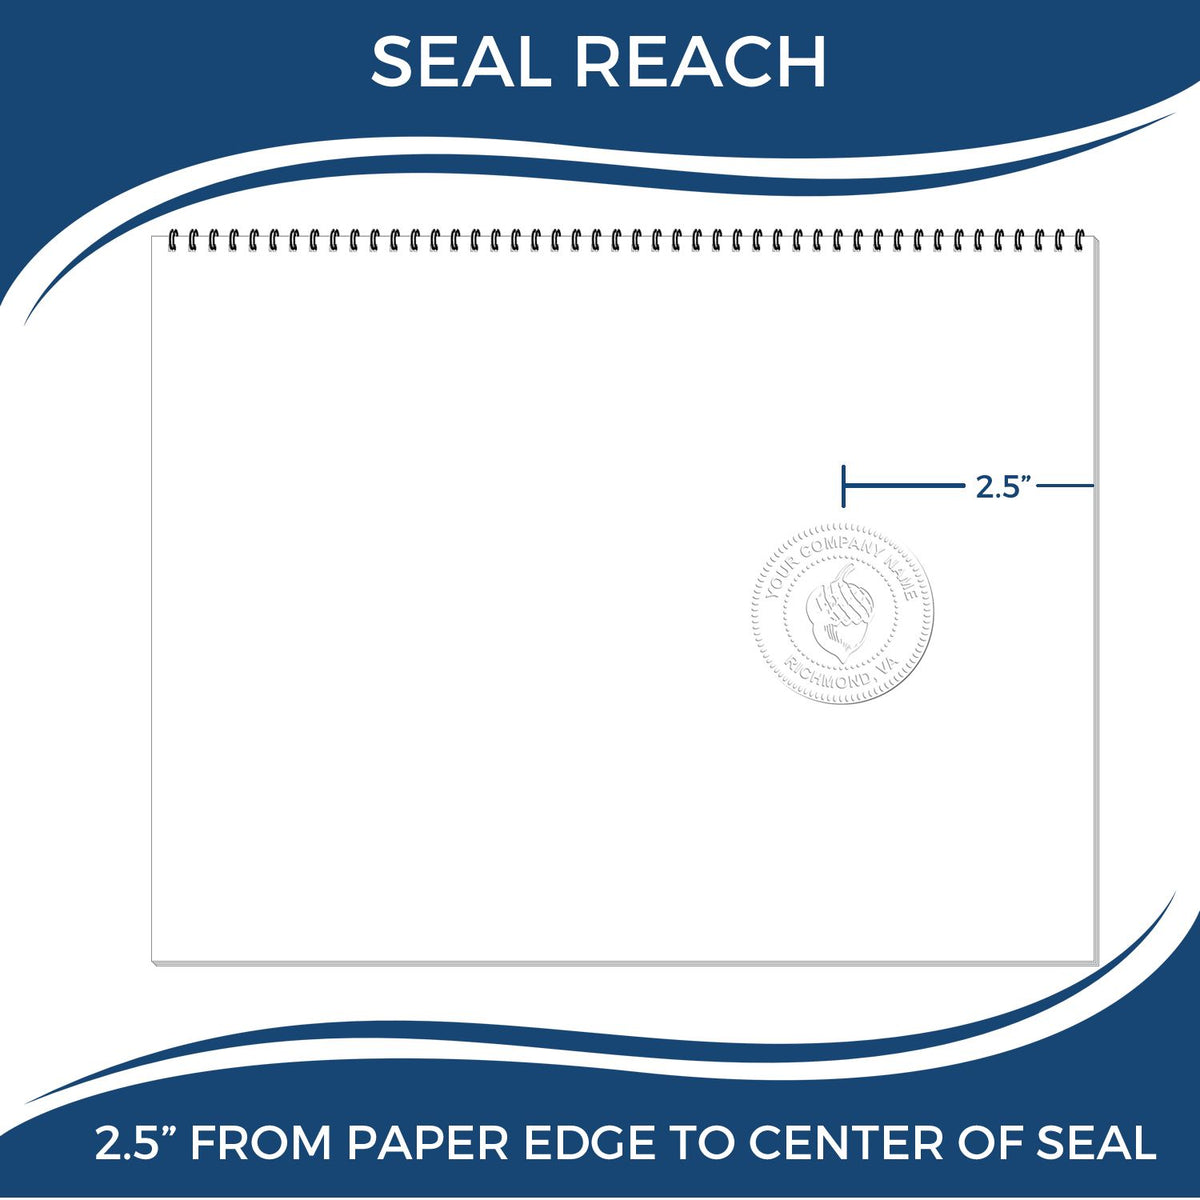 An infographic showing the seal reach which is represented by a ruler and a miniature seal image of the Heavy Duty Cast Iron Delaware Engineer Seal Embosser